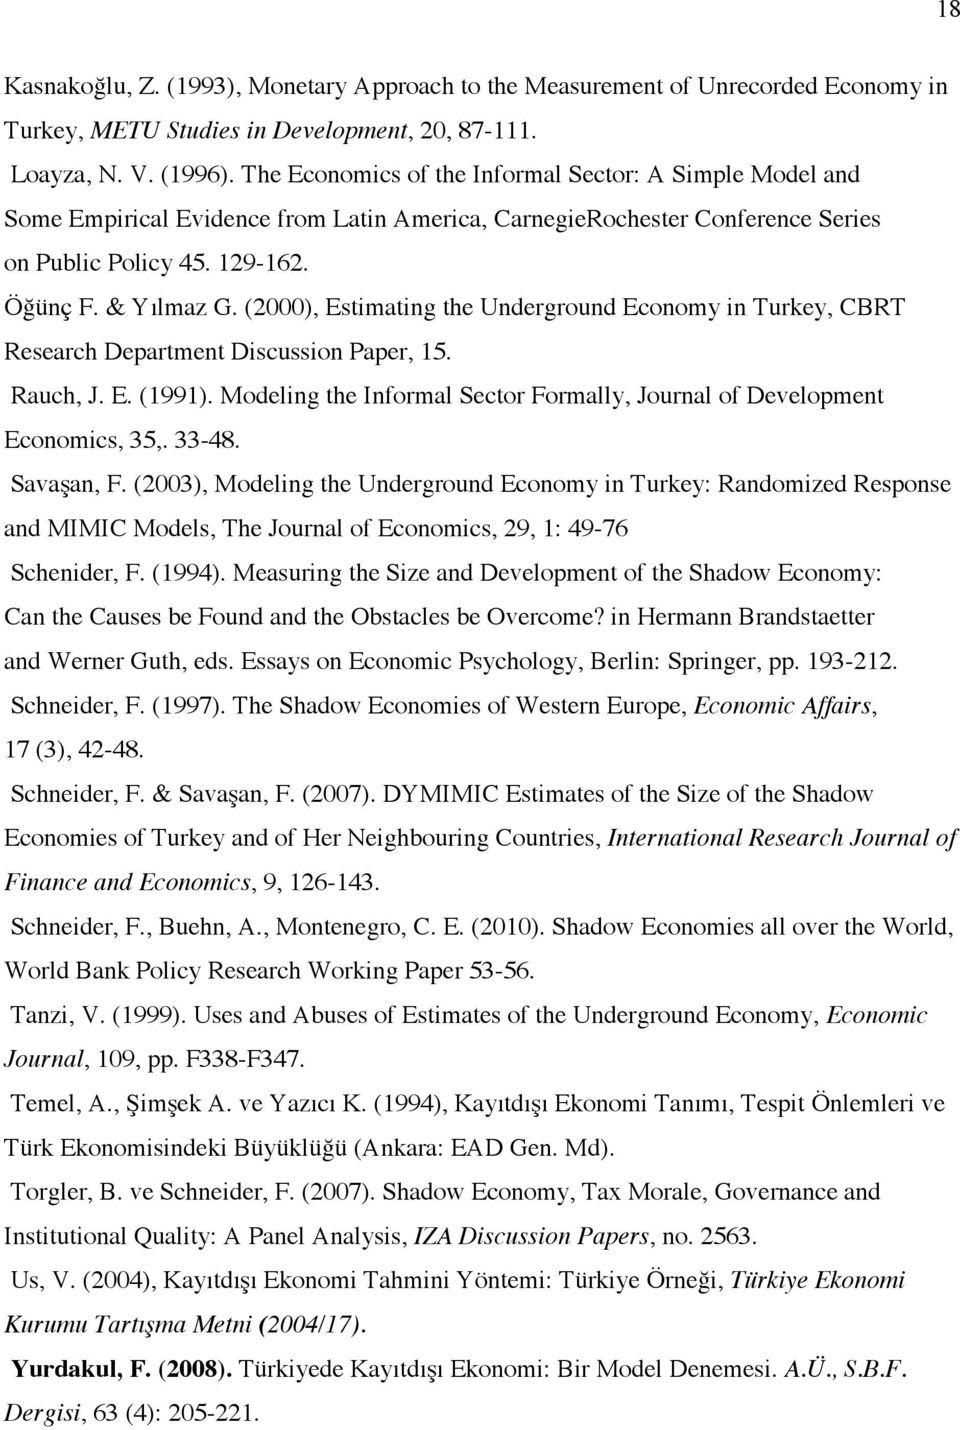 (2000), Estimating the Underground Economy in Turkey, CBRT Research Department Discussion Paper, 15. Rauch, J. E. (1991). Modeling the Informal Sector Formally, Journal of Development Economics, 35,.